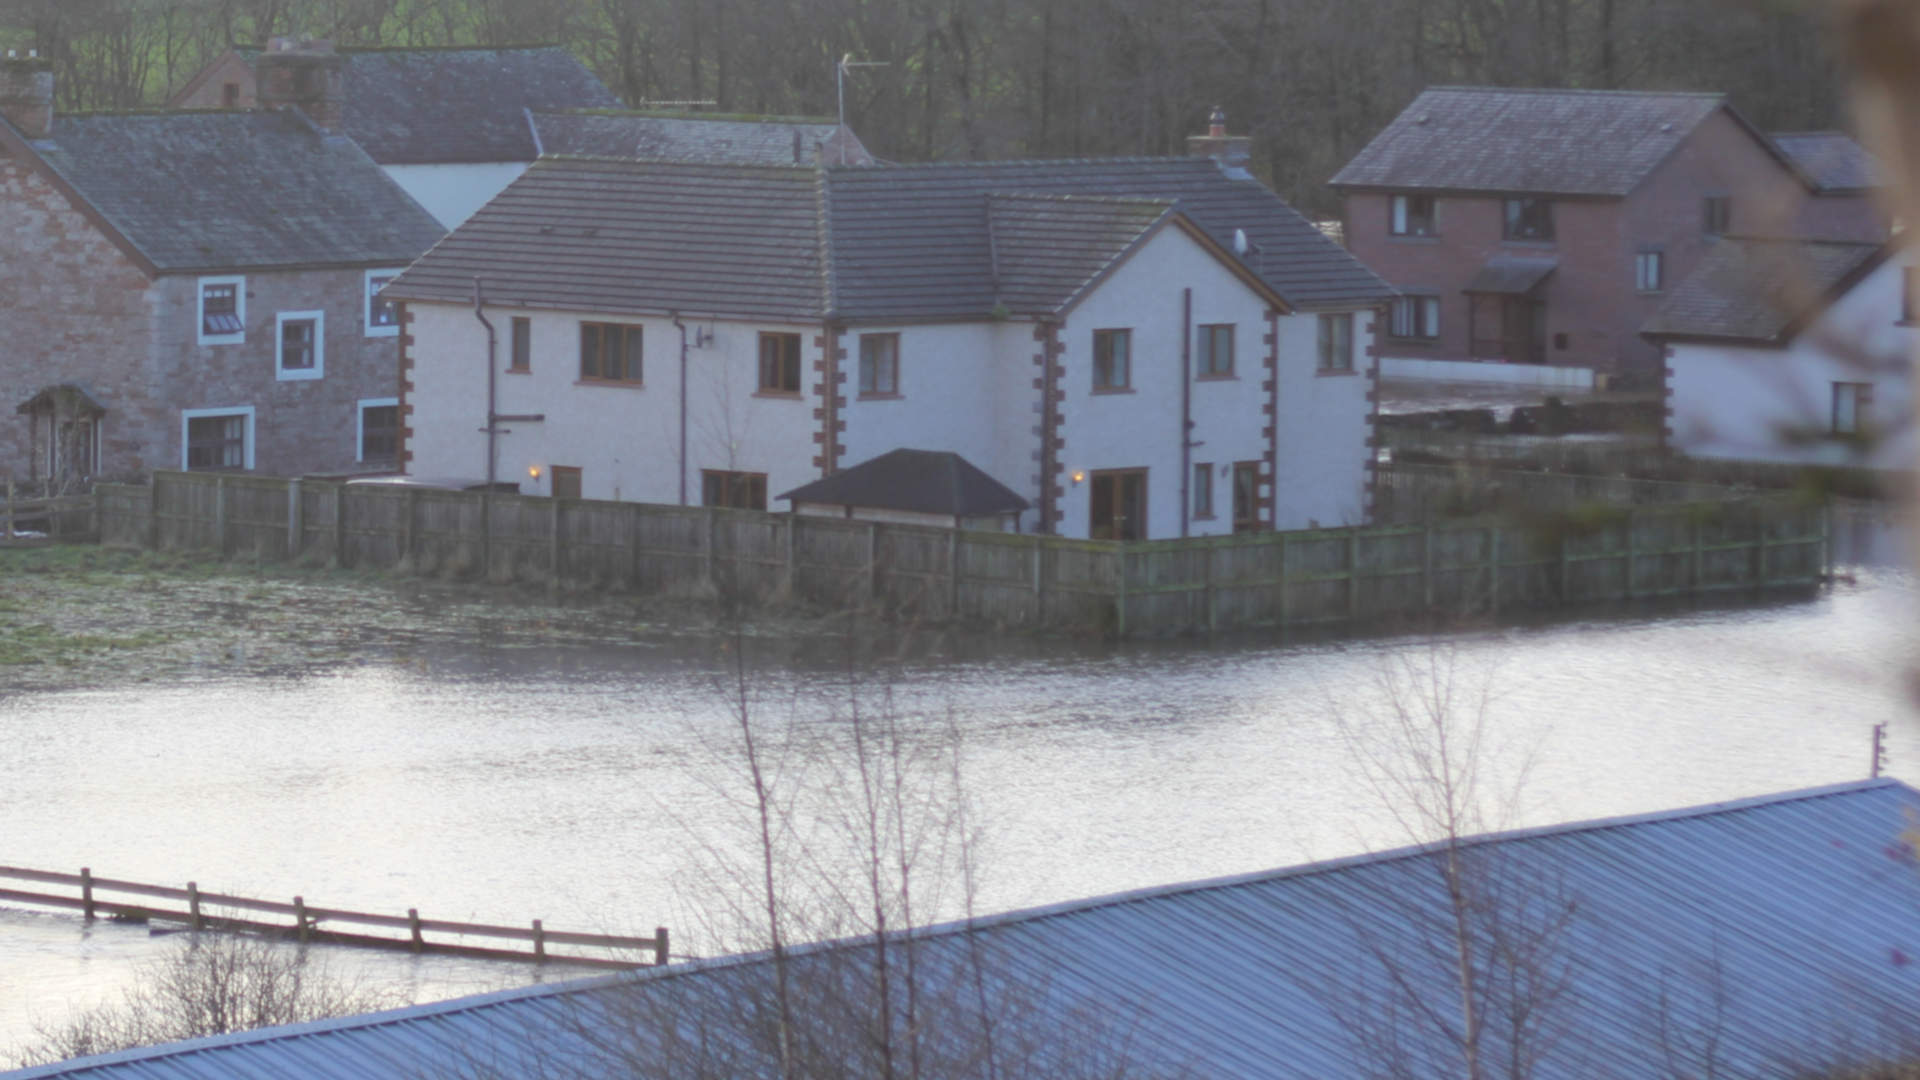 Houses at Eamont Bridge near Penrith surrounded by flood water during Storm Desmond Dec 2015